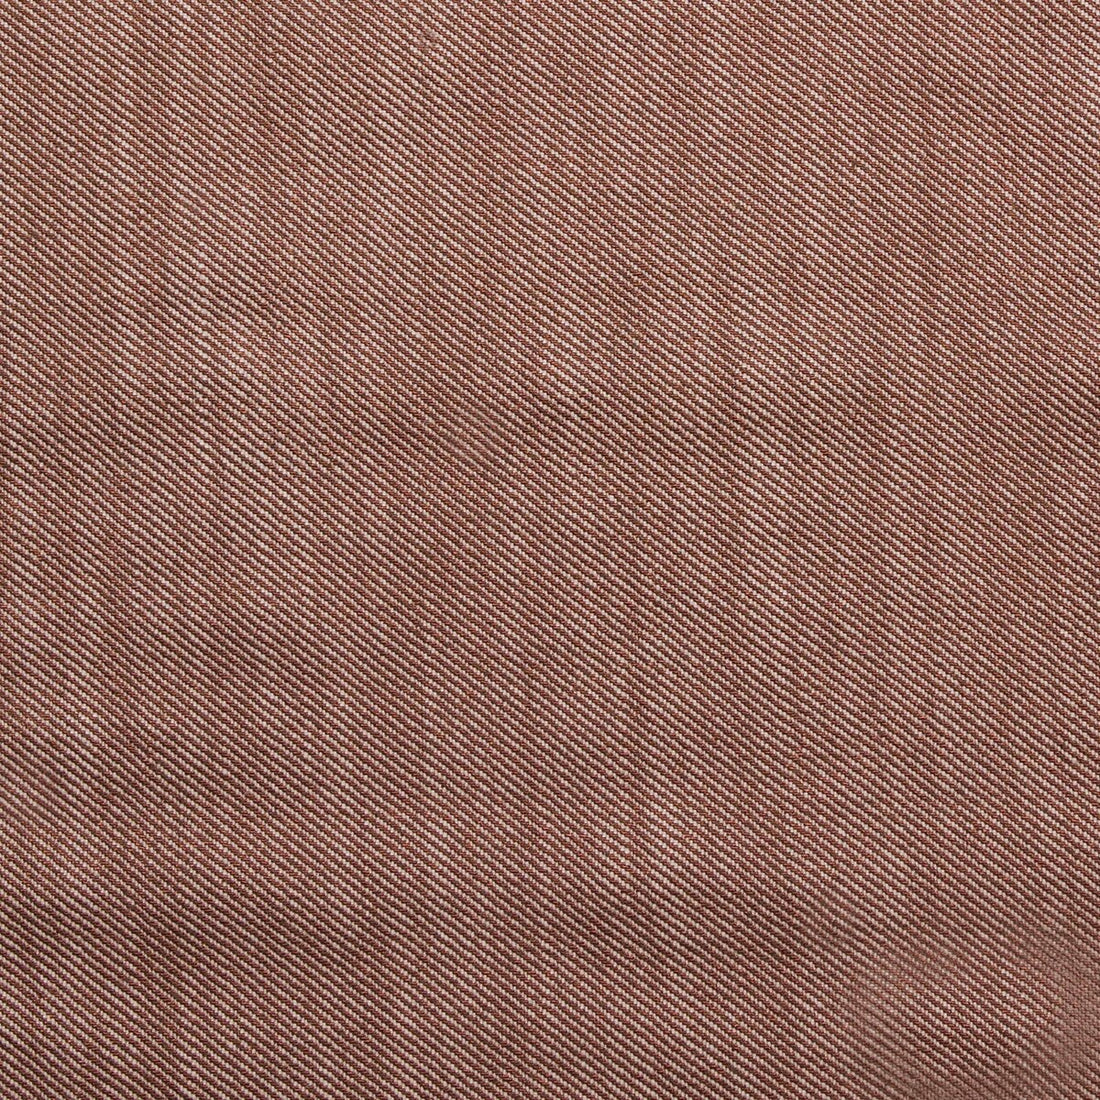 Victoria fabric in teja color - pattern GDT5388.13.0 - by Gaston y Daniela in the Gaston Africalia collection